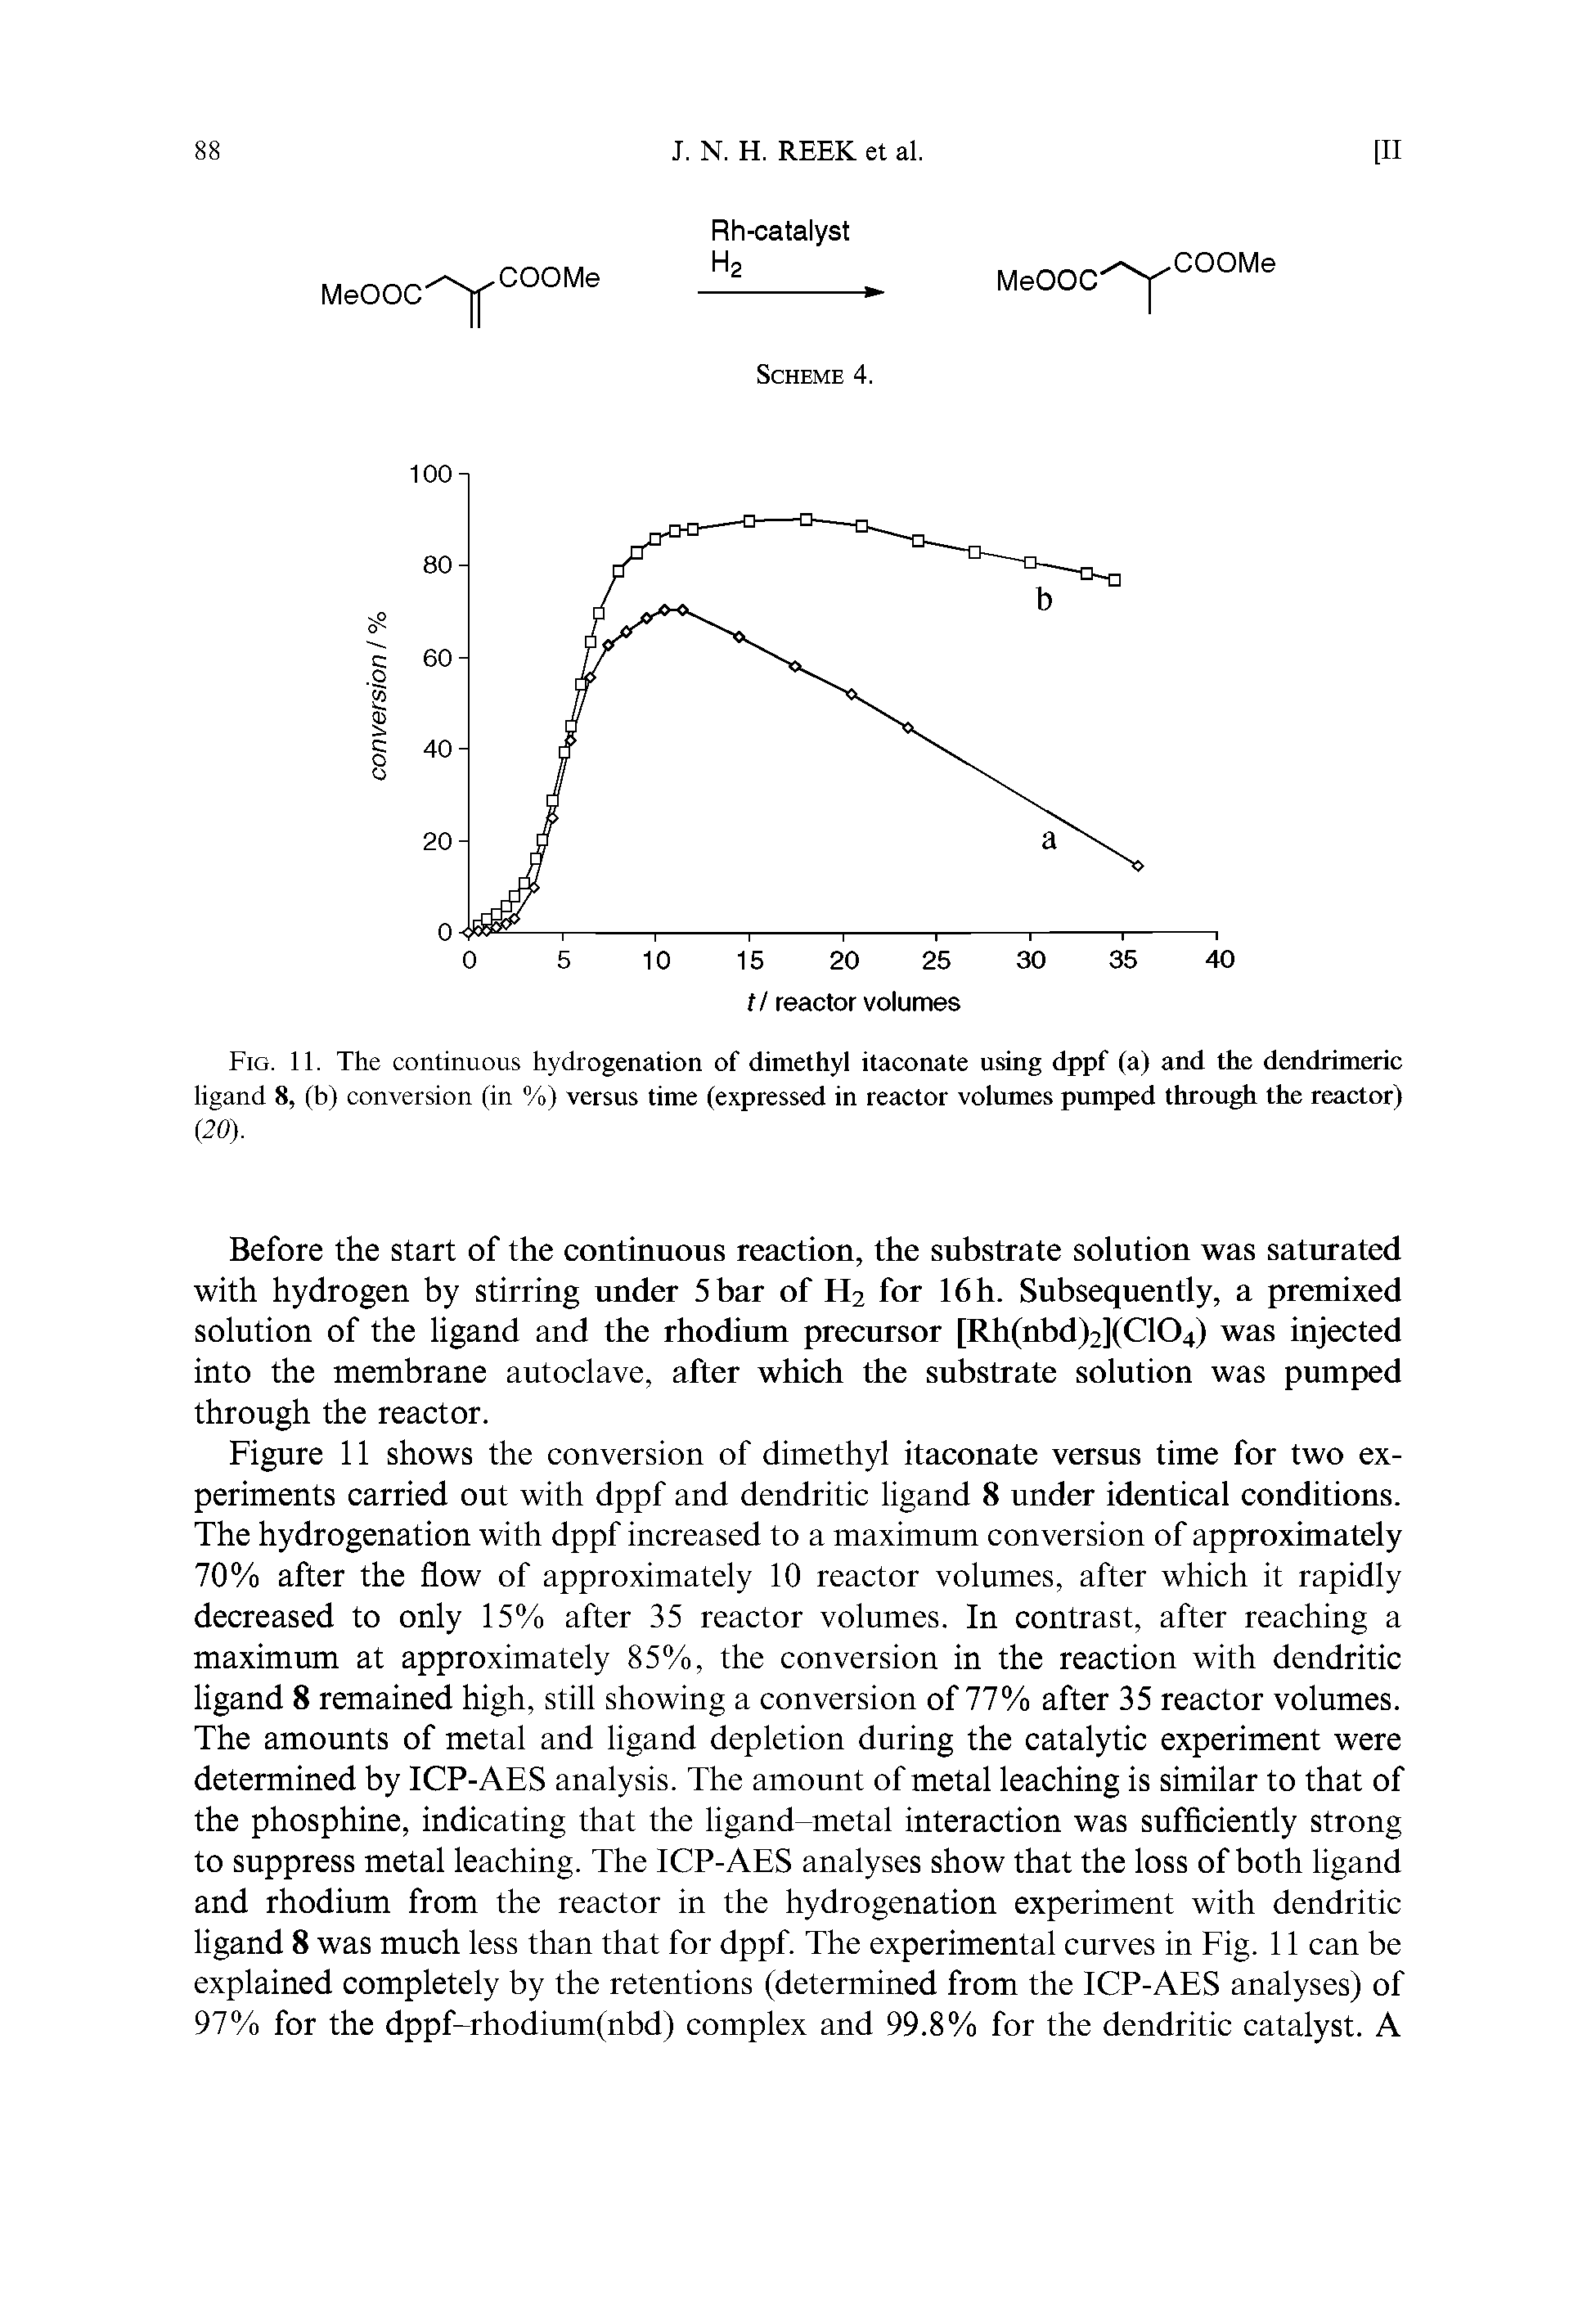 Fig. 11. The continuous hydrogenation of dimethyl itaconate using dppf (a) and the dendrimeric ligand 8, (b) conversion (in %) versus time (expressed in reactor volumes pumped through the reactor) (20).